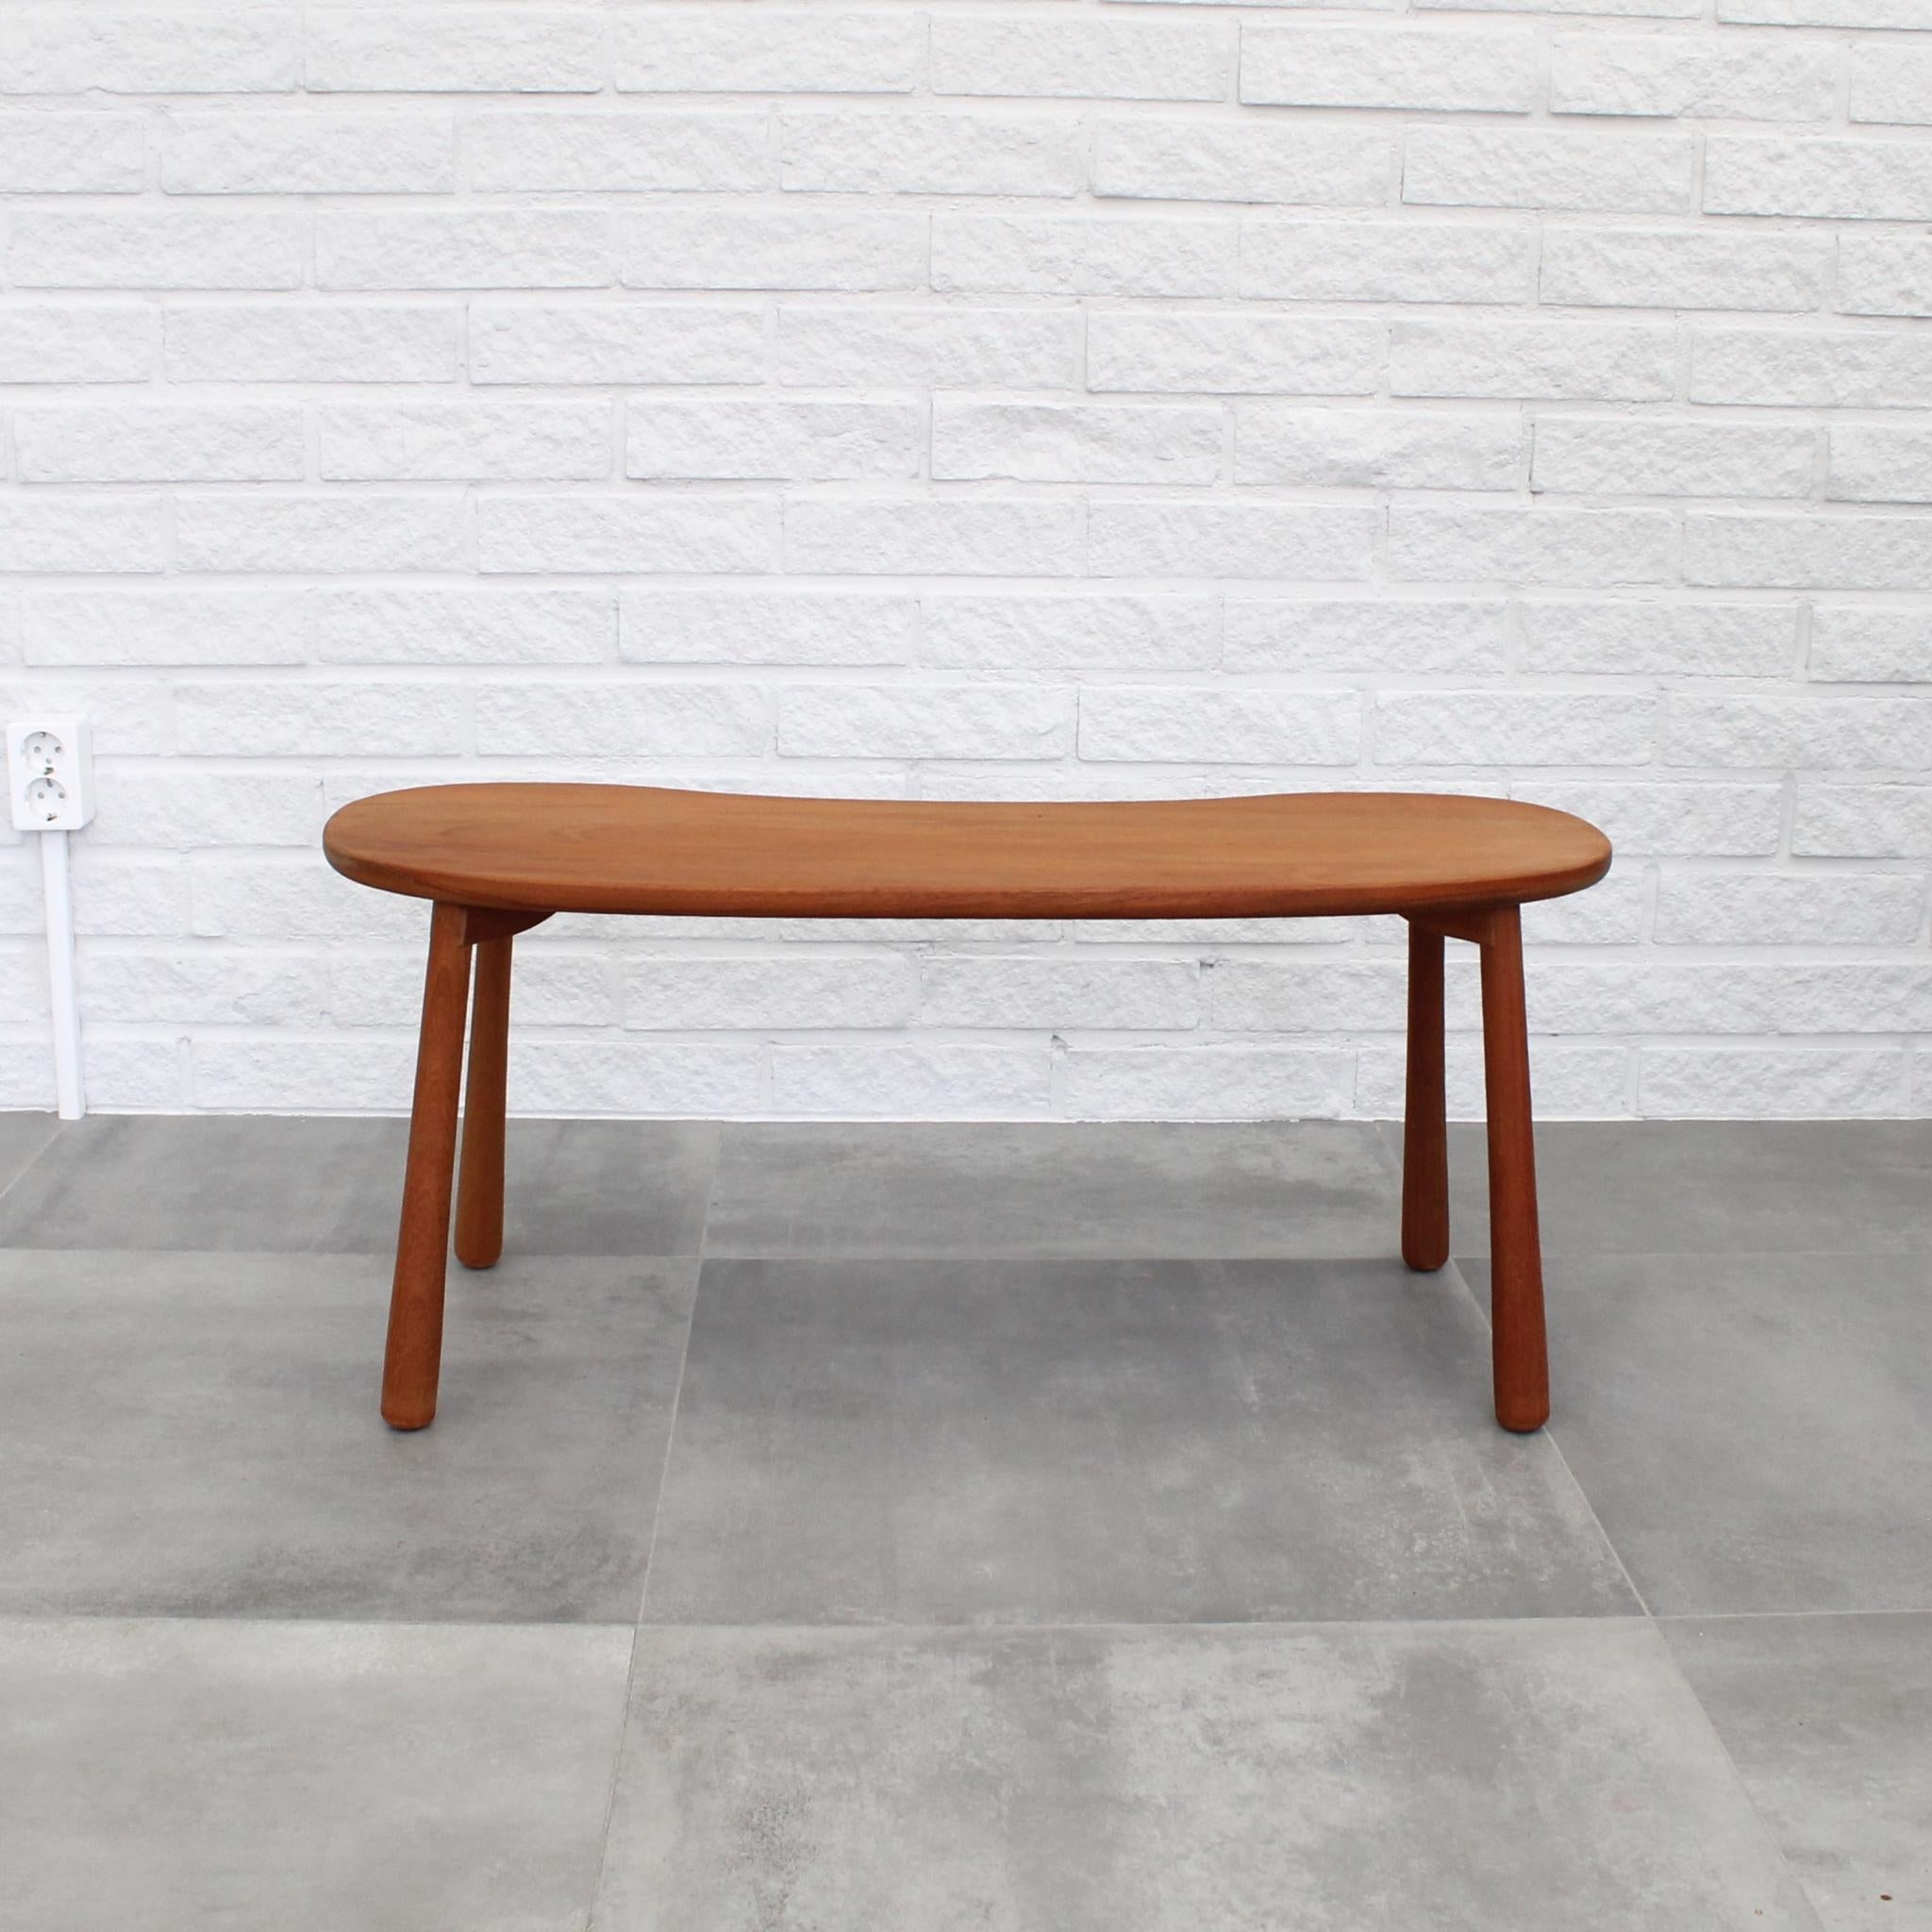 Stool model 1034, designed by Josef Frank for Firma Svenskt Tenn. Its versatile design makes it suitable for use as both a stool and a low organic side table. Crafted from solid mahogany, this model, often called the 